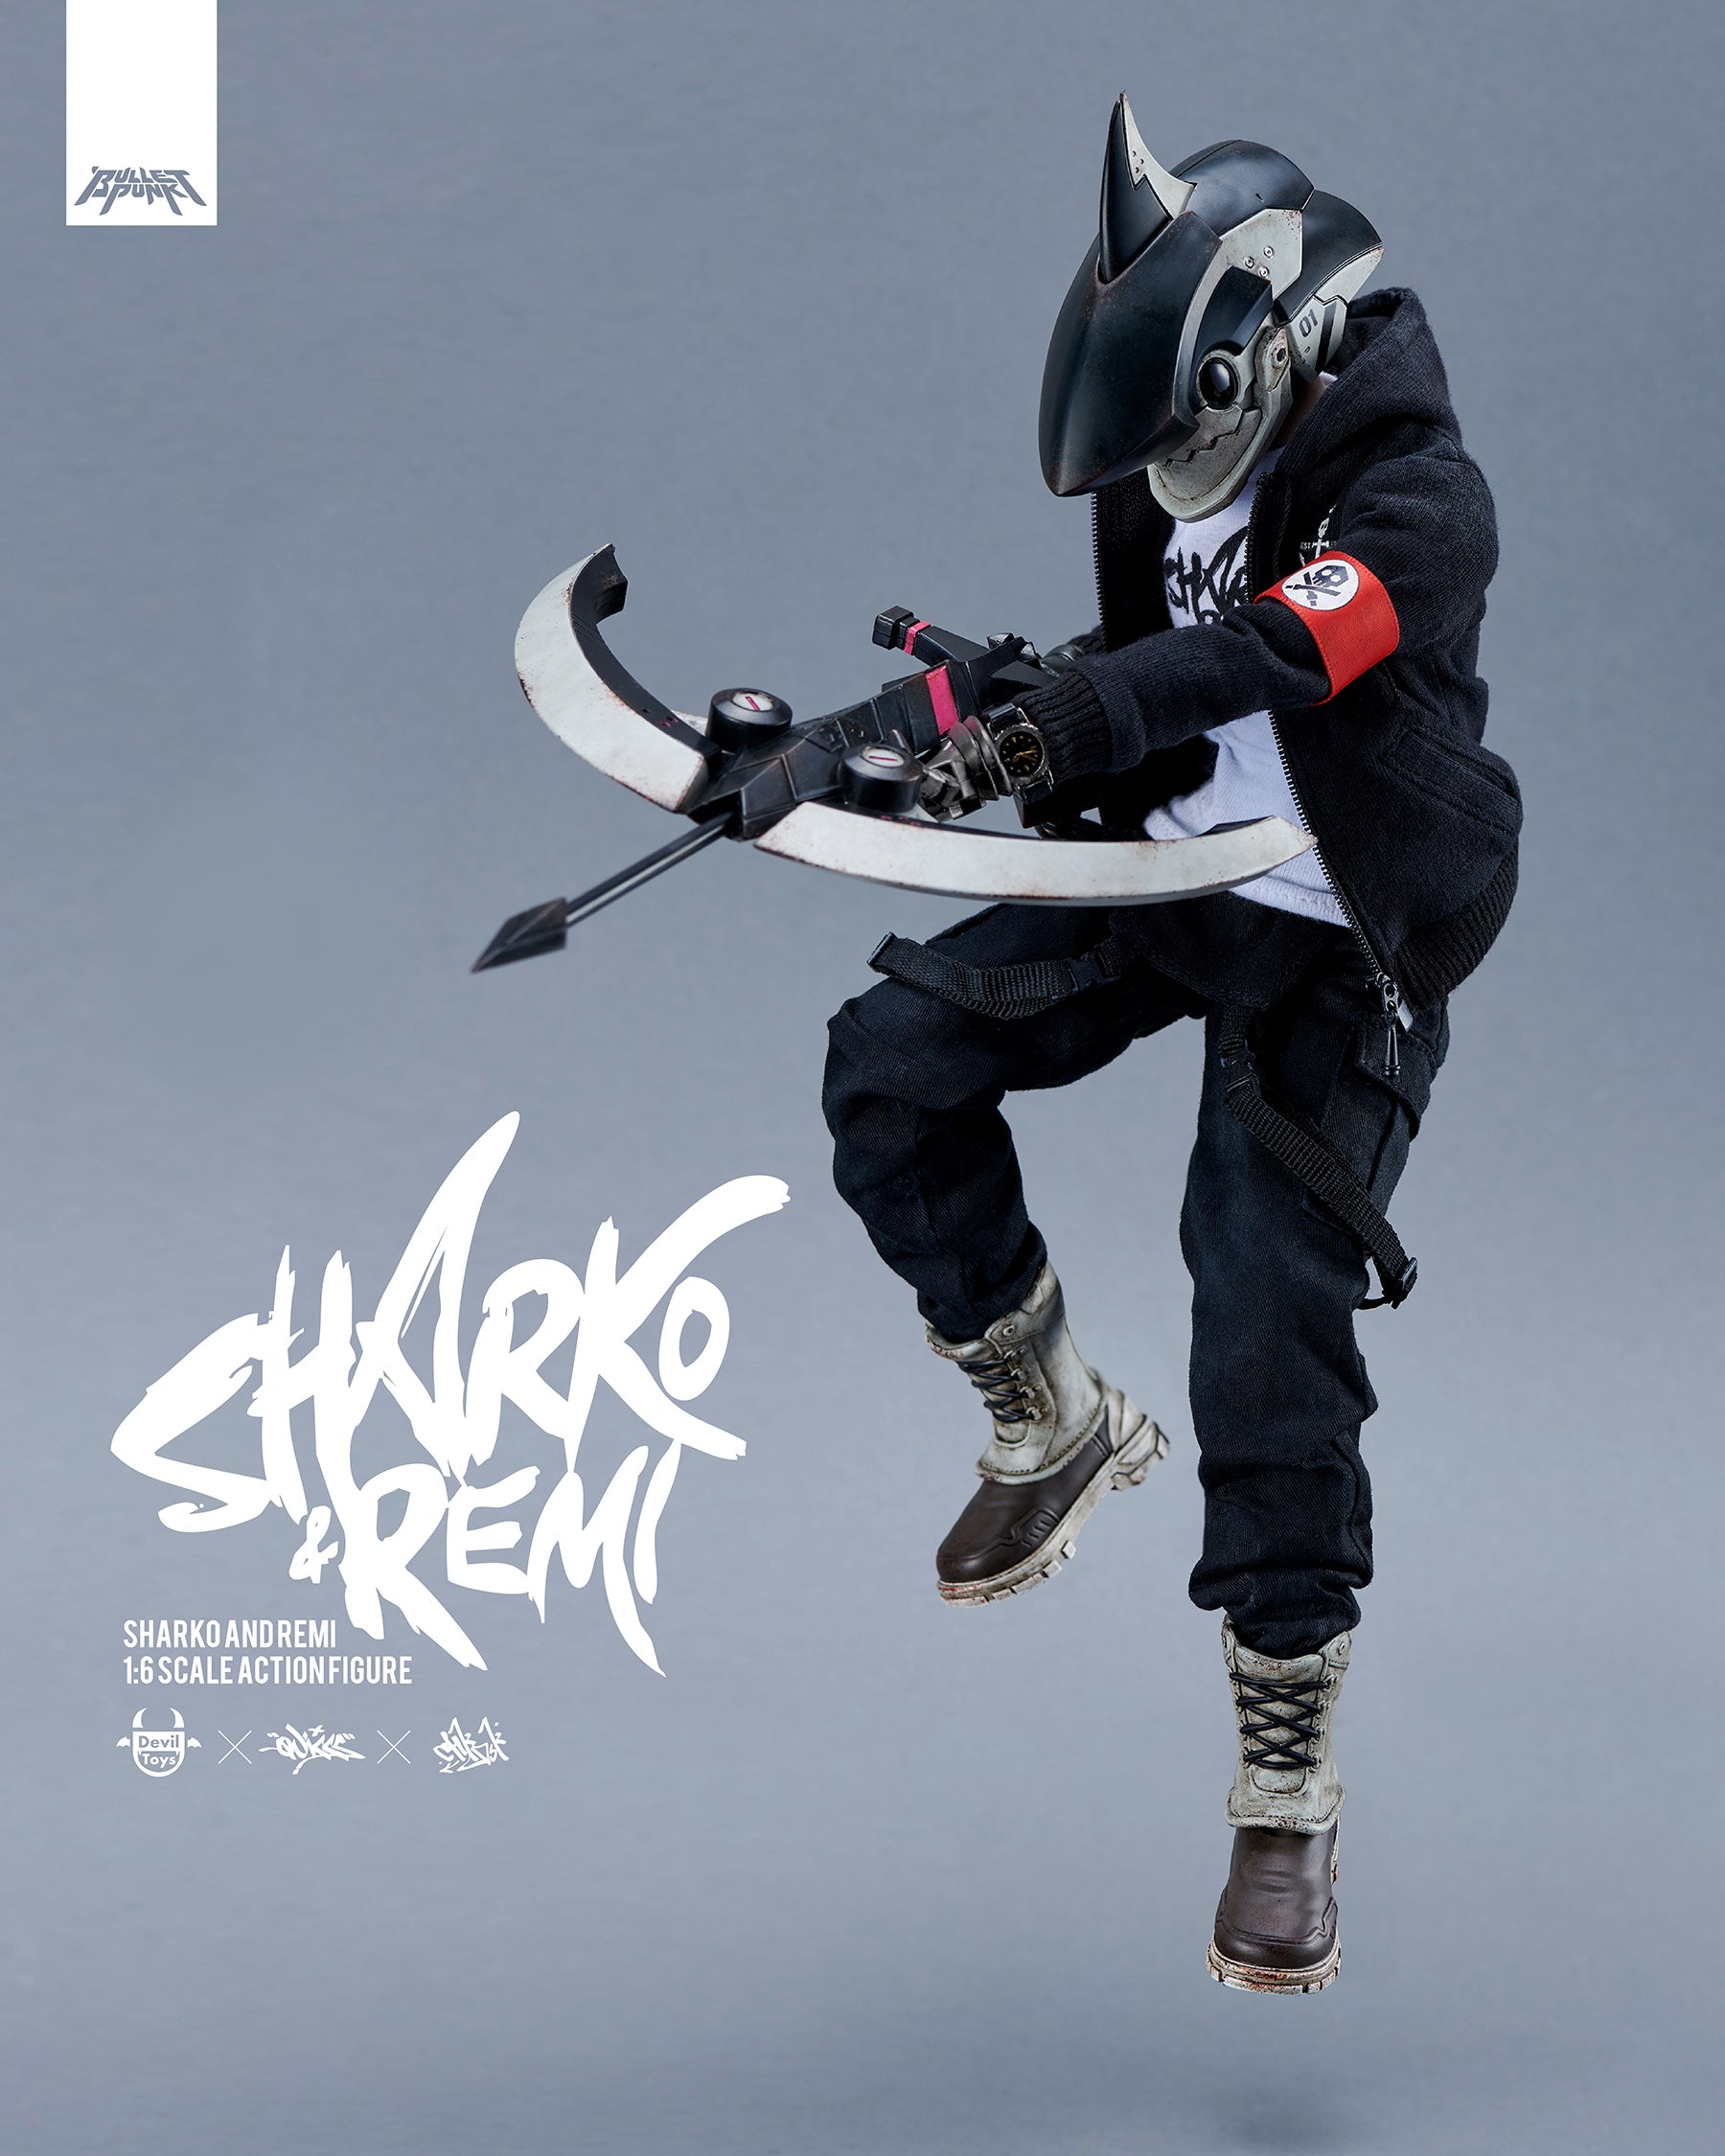 SHARKO & REMI 1/6 SCALE FIGURES(Fortress Black) By Quiccs x CHKDSK x Devil Toys